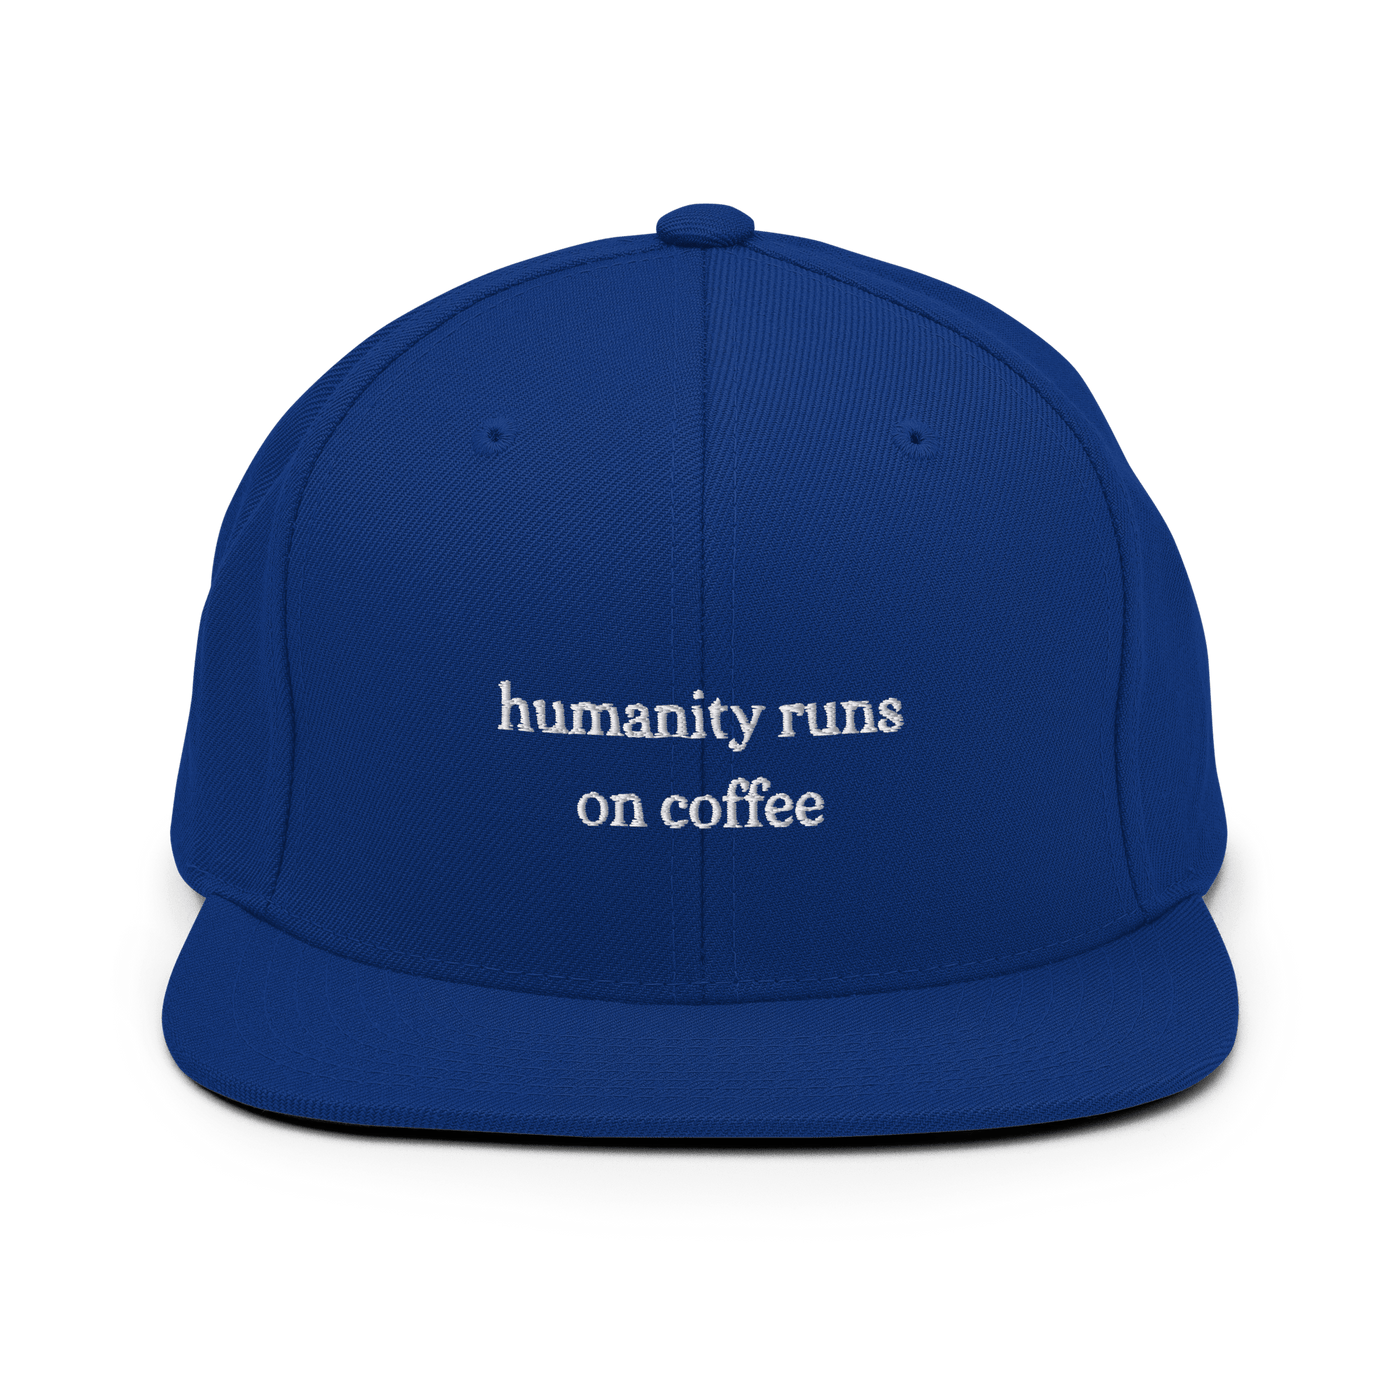 Humanity runs on coffee Snapback Hat - Royal Blue - - Just Another Cap Store